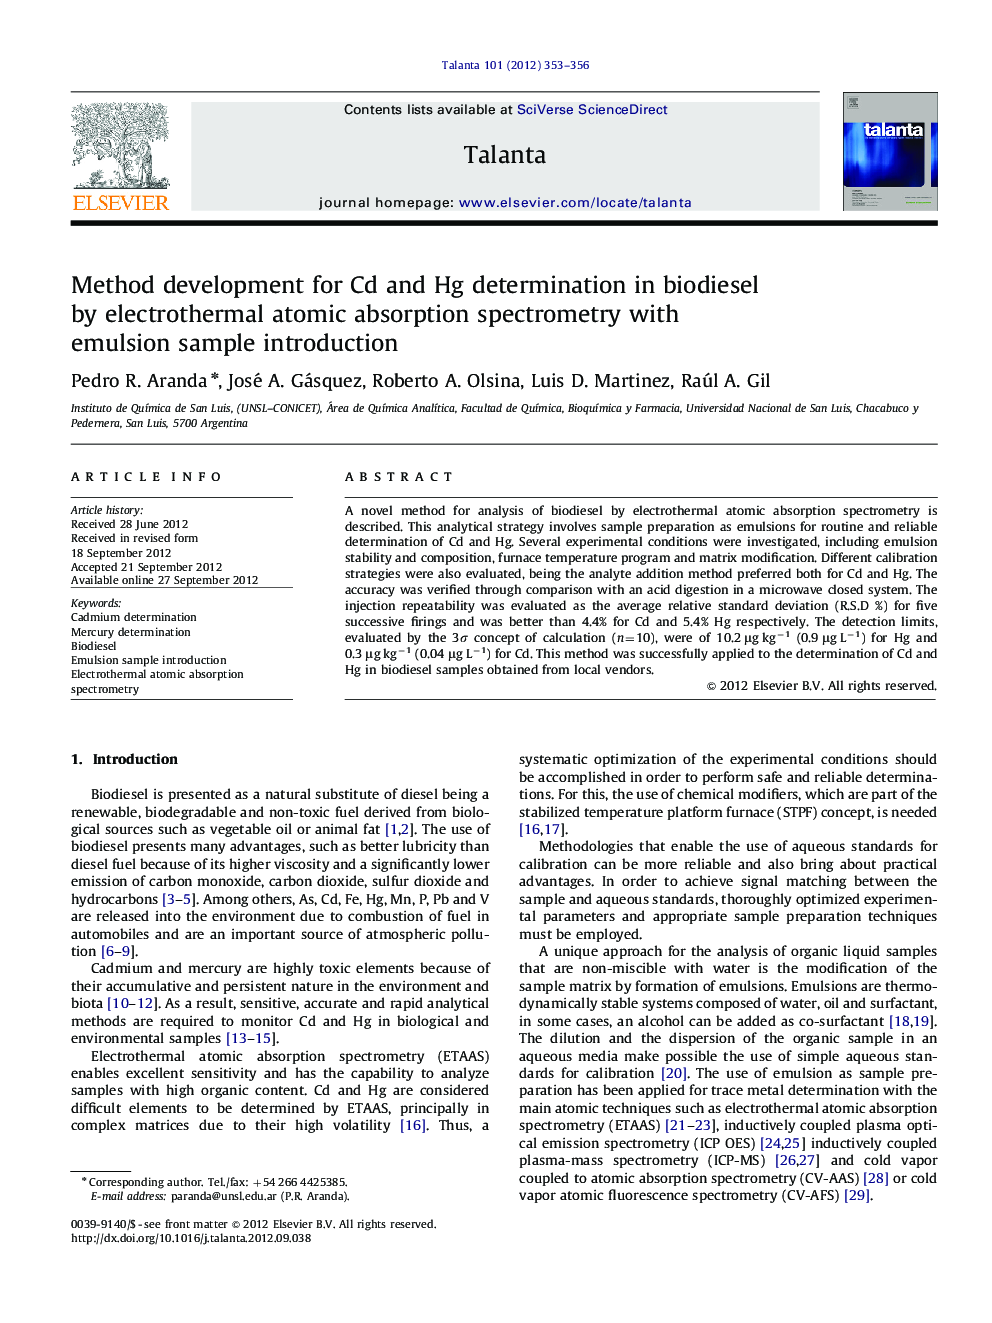 Method development for Cd and Hg determination in biodiesel by electrothermal atomic absorption spectrometry with emulsion sample introduction